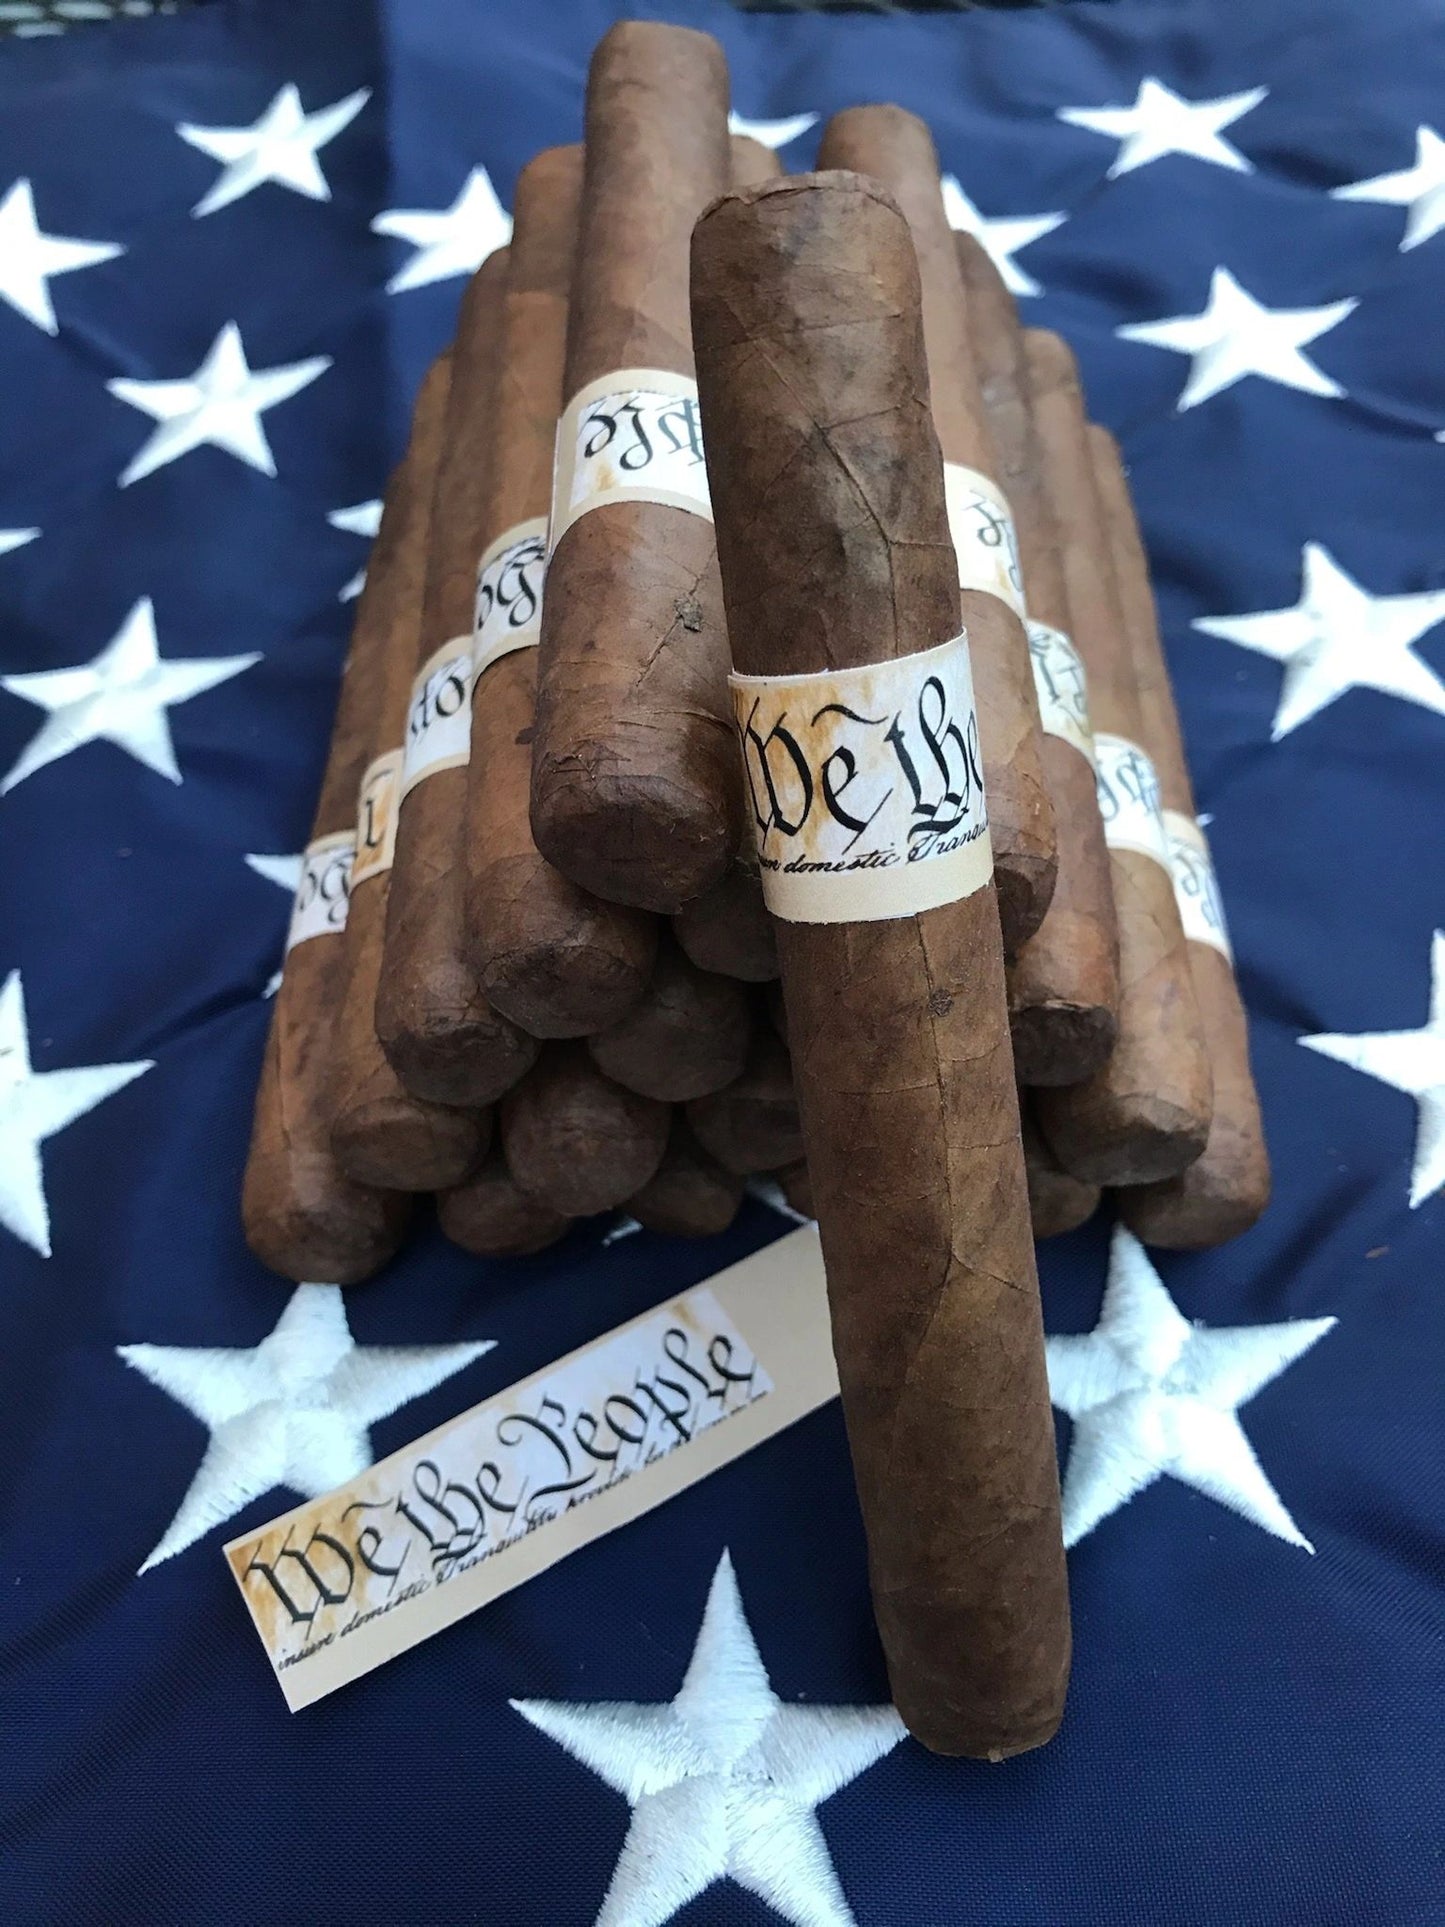 The Deployment We the People Cigar